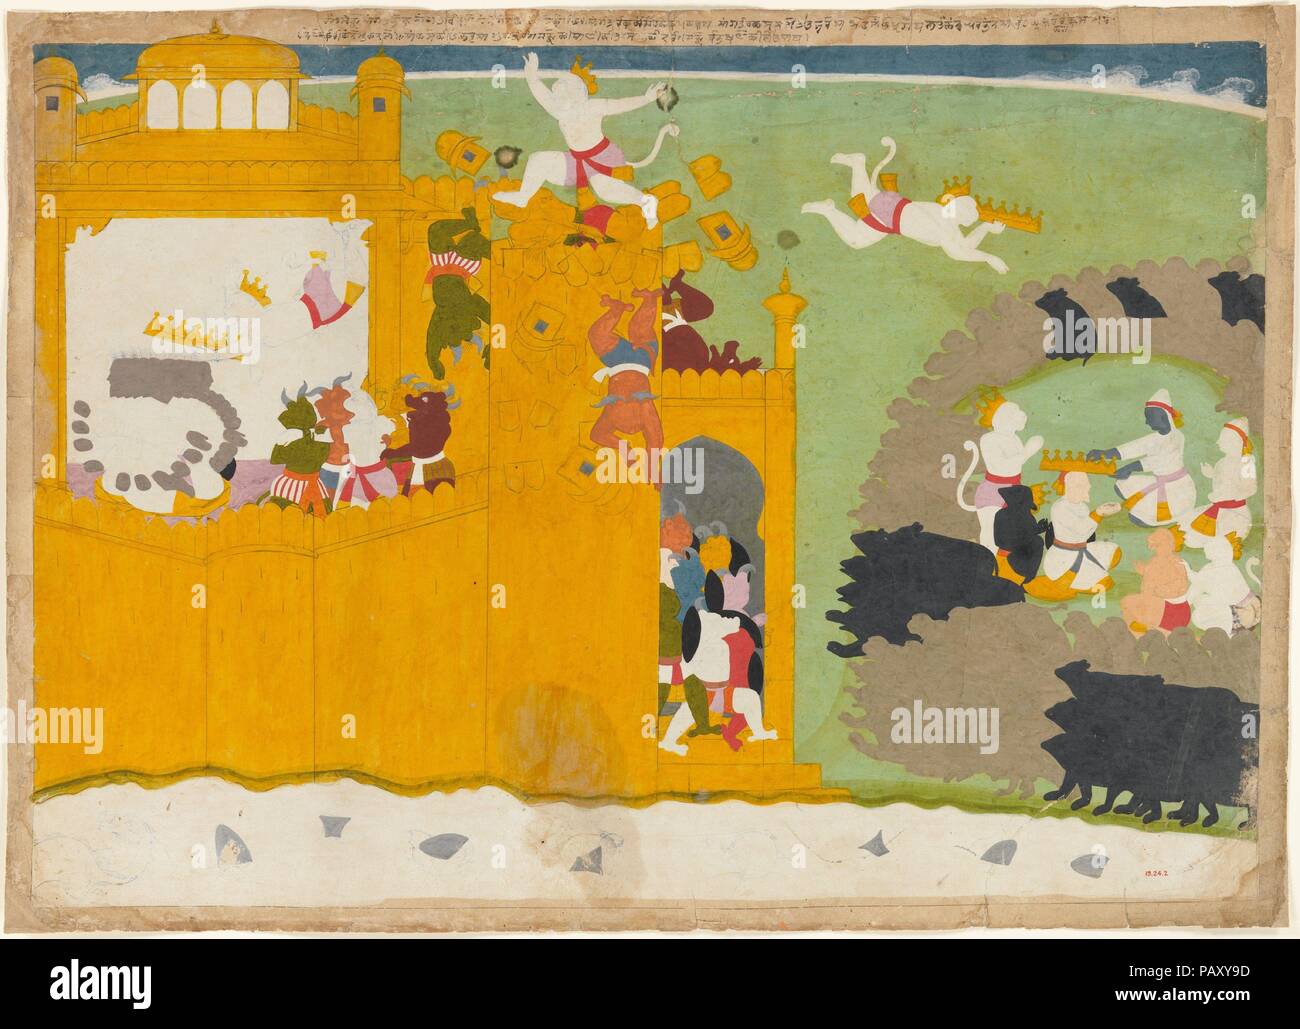 The Monkey Leader Angada Steals Ravana's Crown from His Fortress. Artist: Attributed to Manaku (active ca. 1725-60). Culture: India (Punjab Hills, Guler). Dimensions: 22 5/16 x 33 in. (56.7 x 83.8 cm). Date: ca. 1725.  This scene is described in Valmiki's Ramayana: 'Then [Angada] the powerful son of Bali, scaled [Ravana's] palace up to its roof . . . the impact of his bounds caused it to crumble.' The great monkey warrior Angada is shown four times: leaping over the ramparts and casting down demons, stealing Ravana's crown, flying though the air to return to Rama's camp, and attending the crow Stock Photo